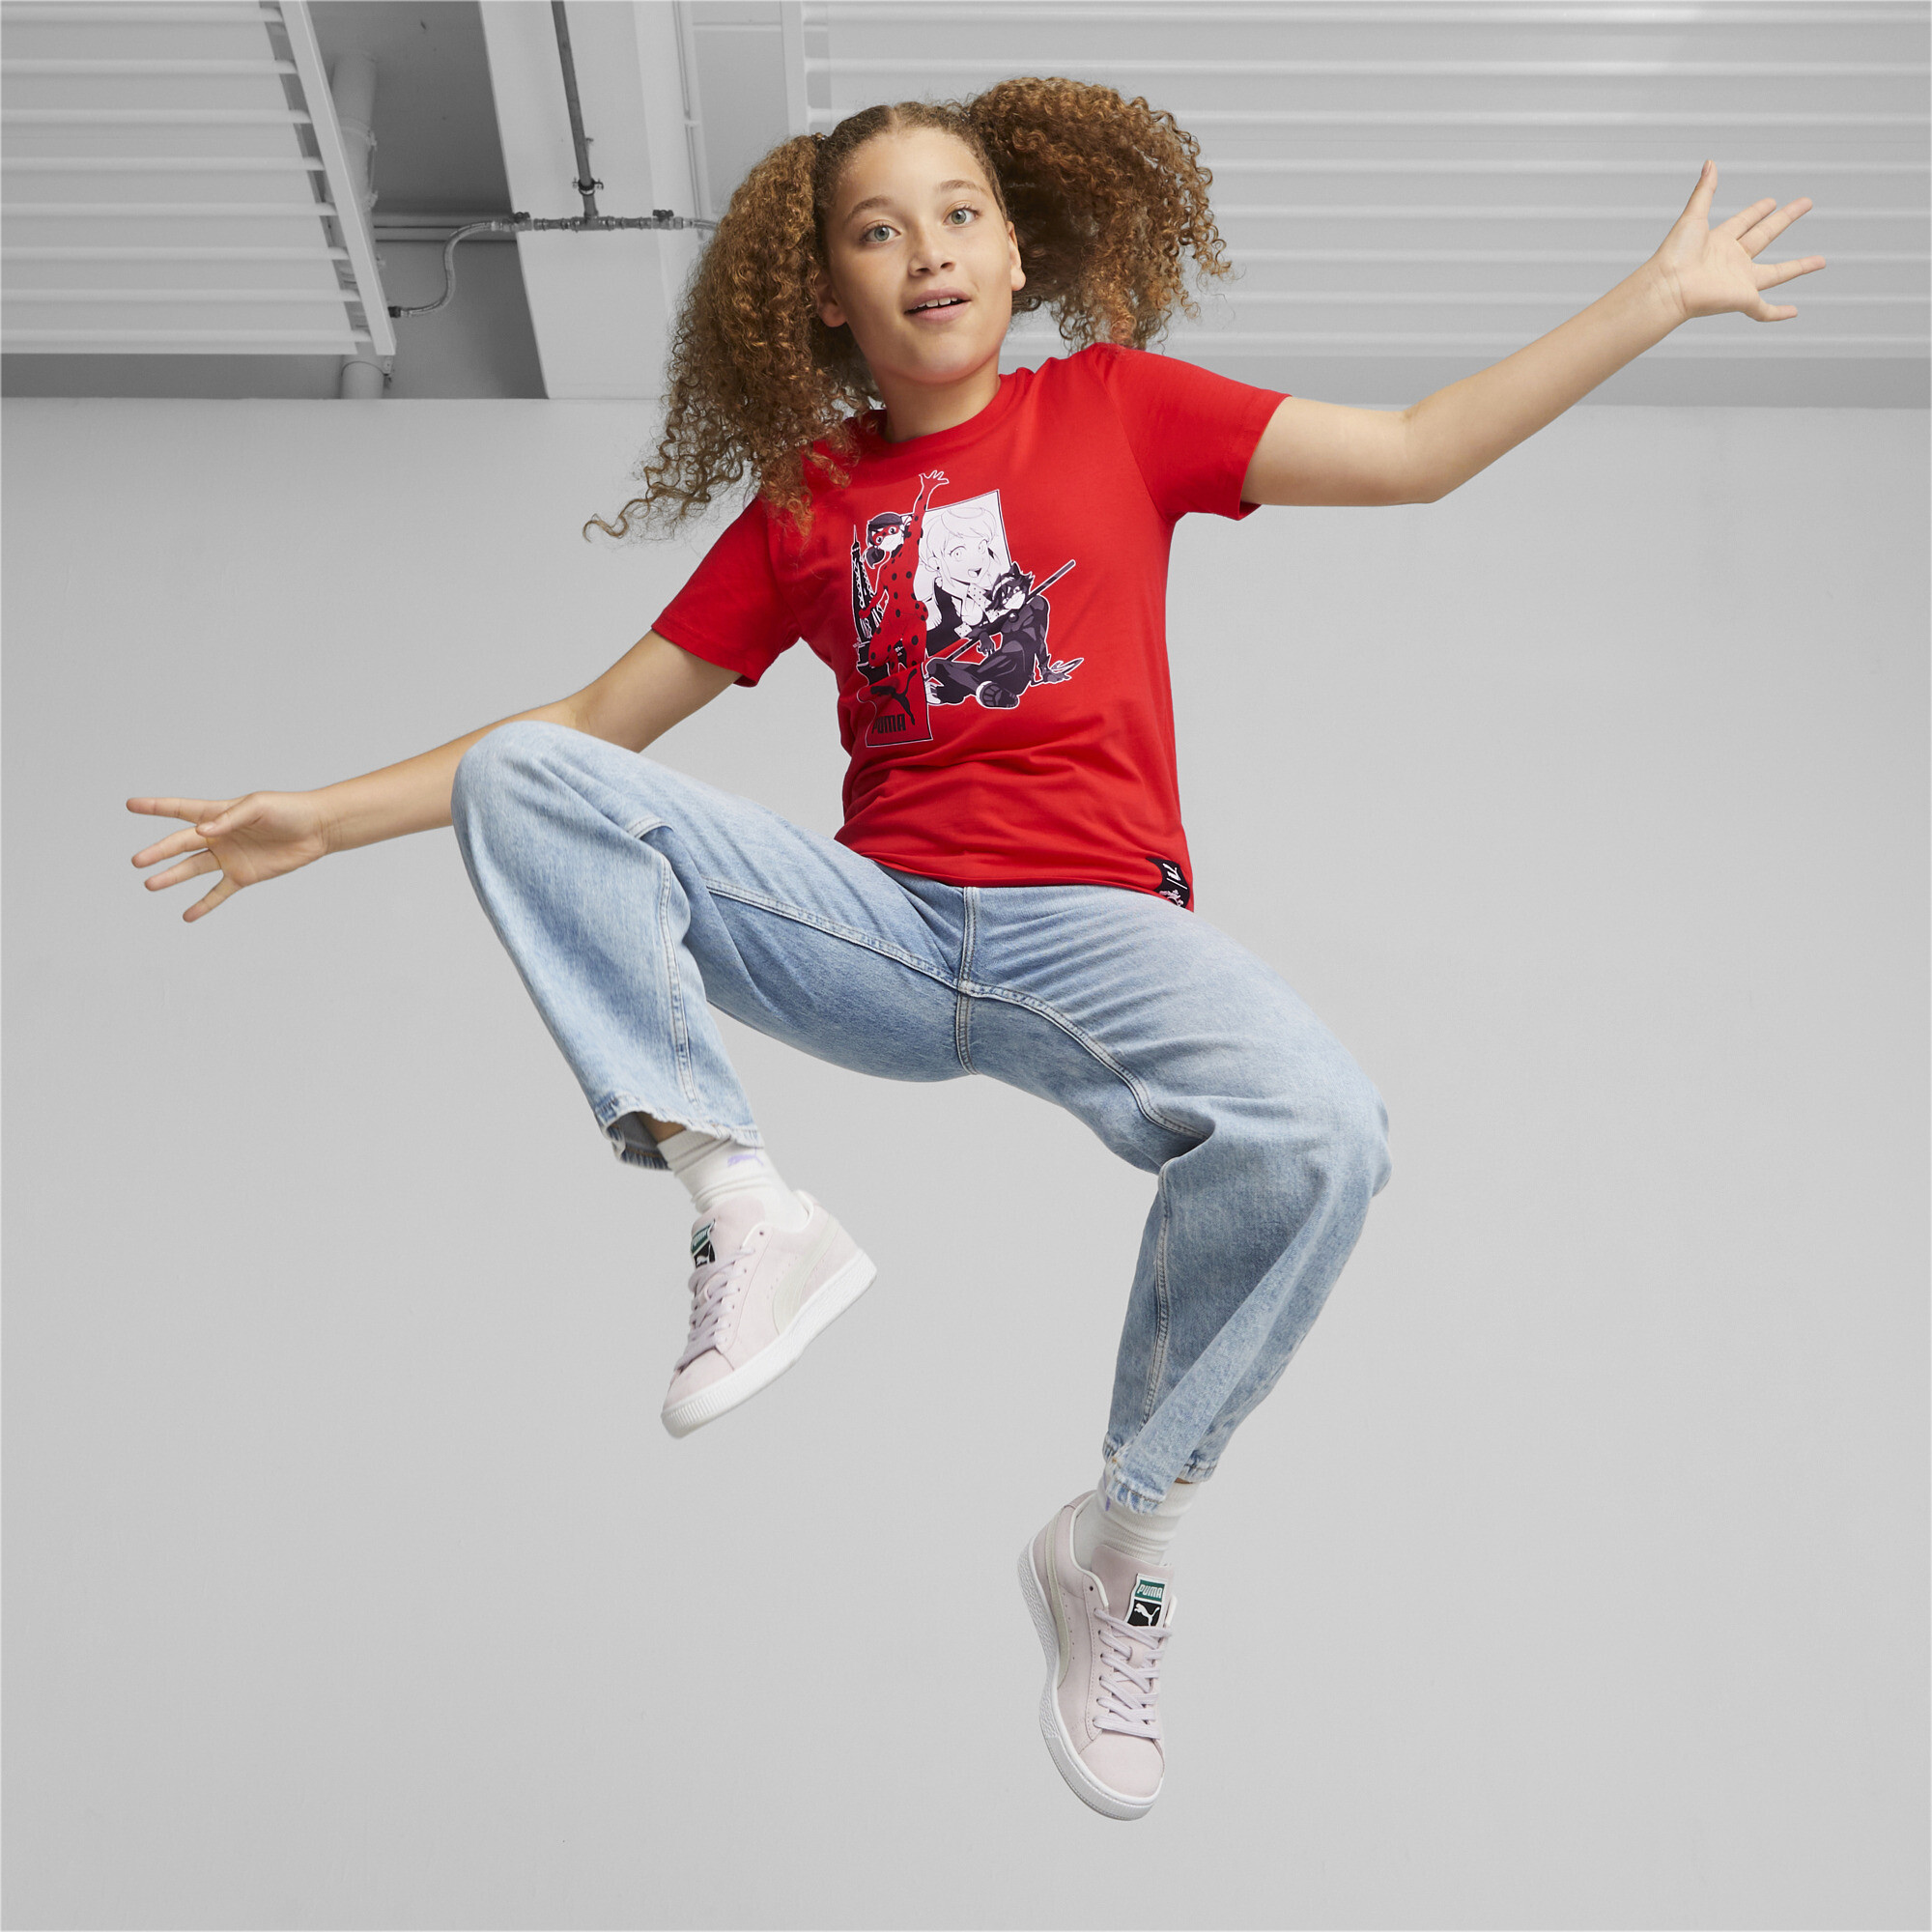 PUMA X MIRACULOUS T-Shirt In Red, Size 15-16 Youth